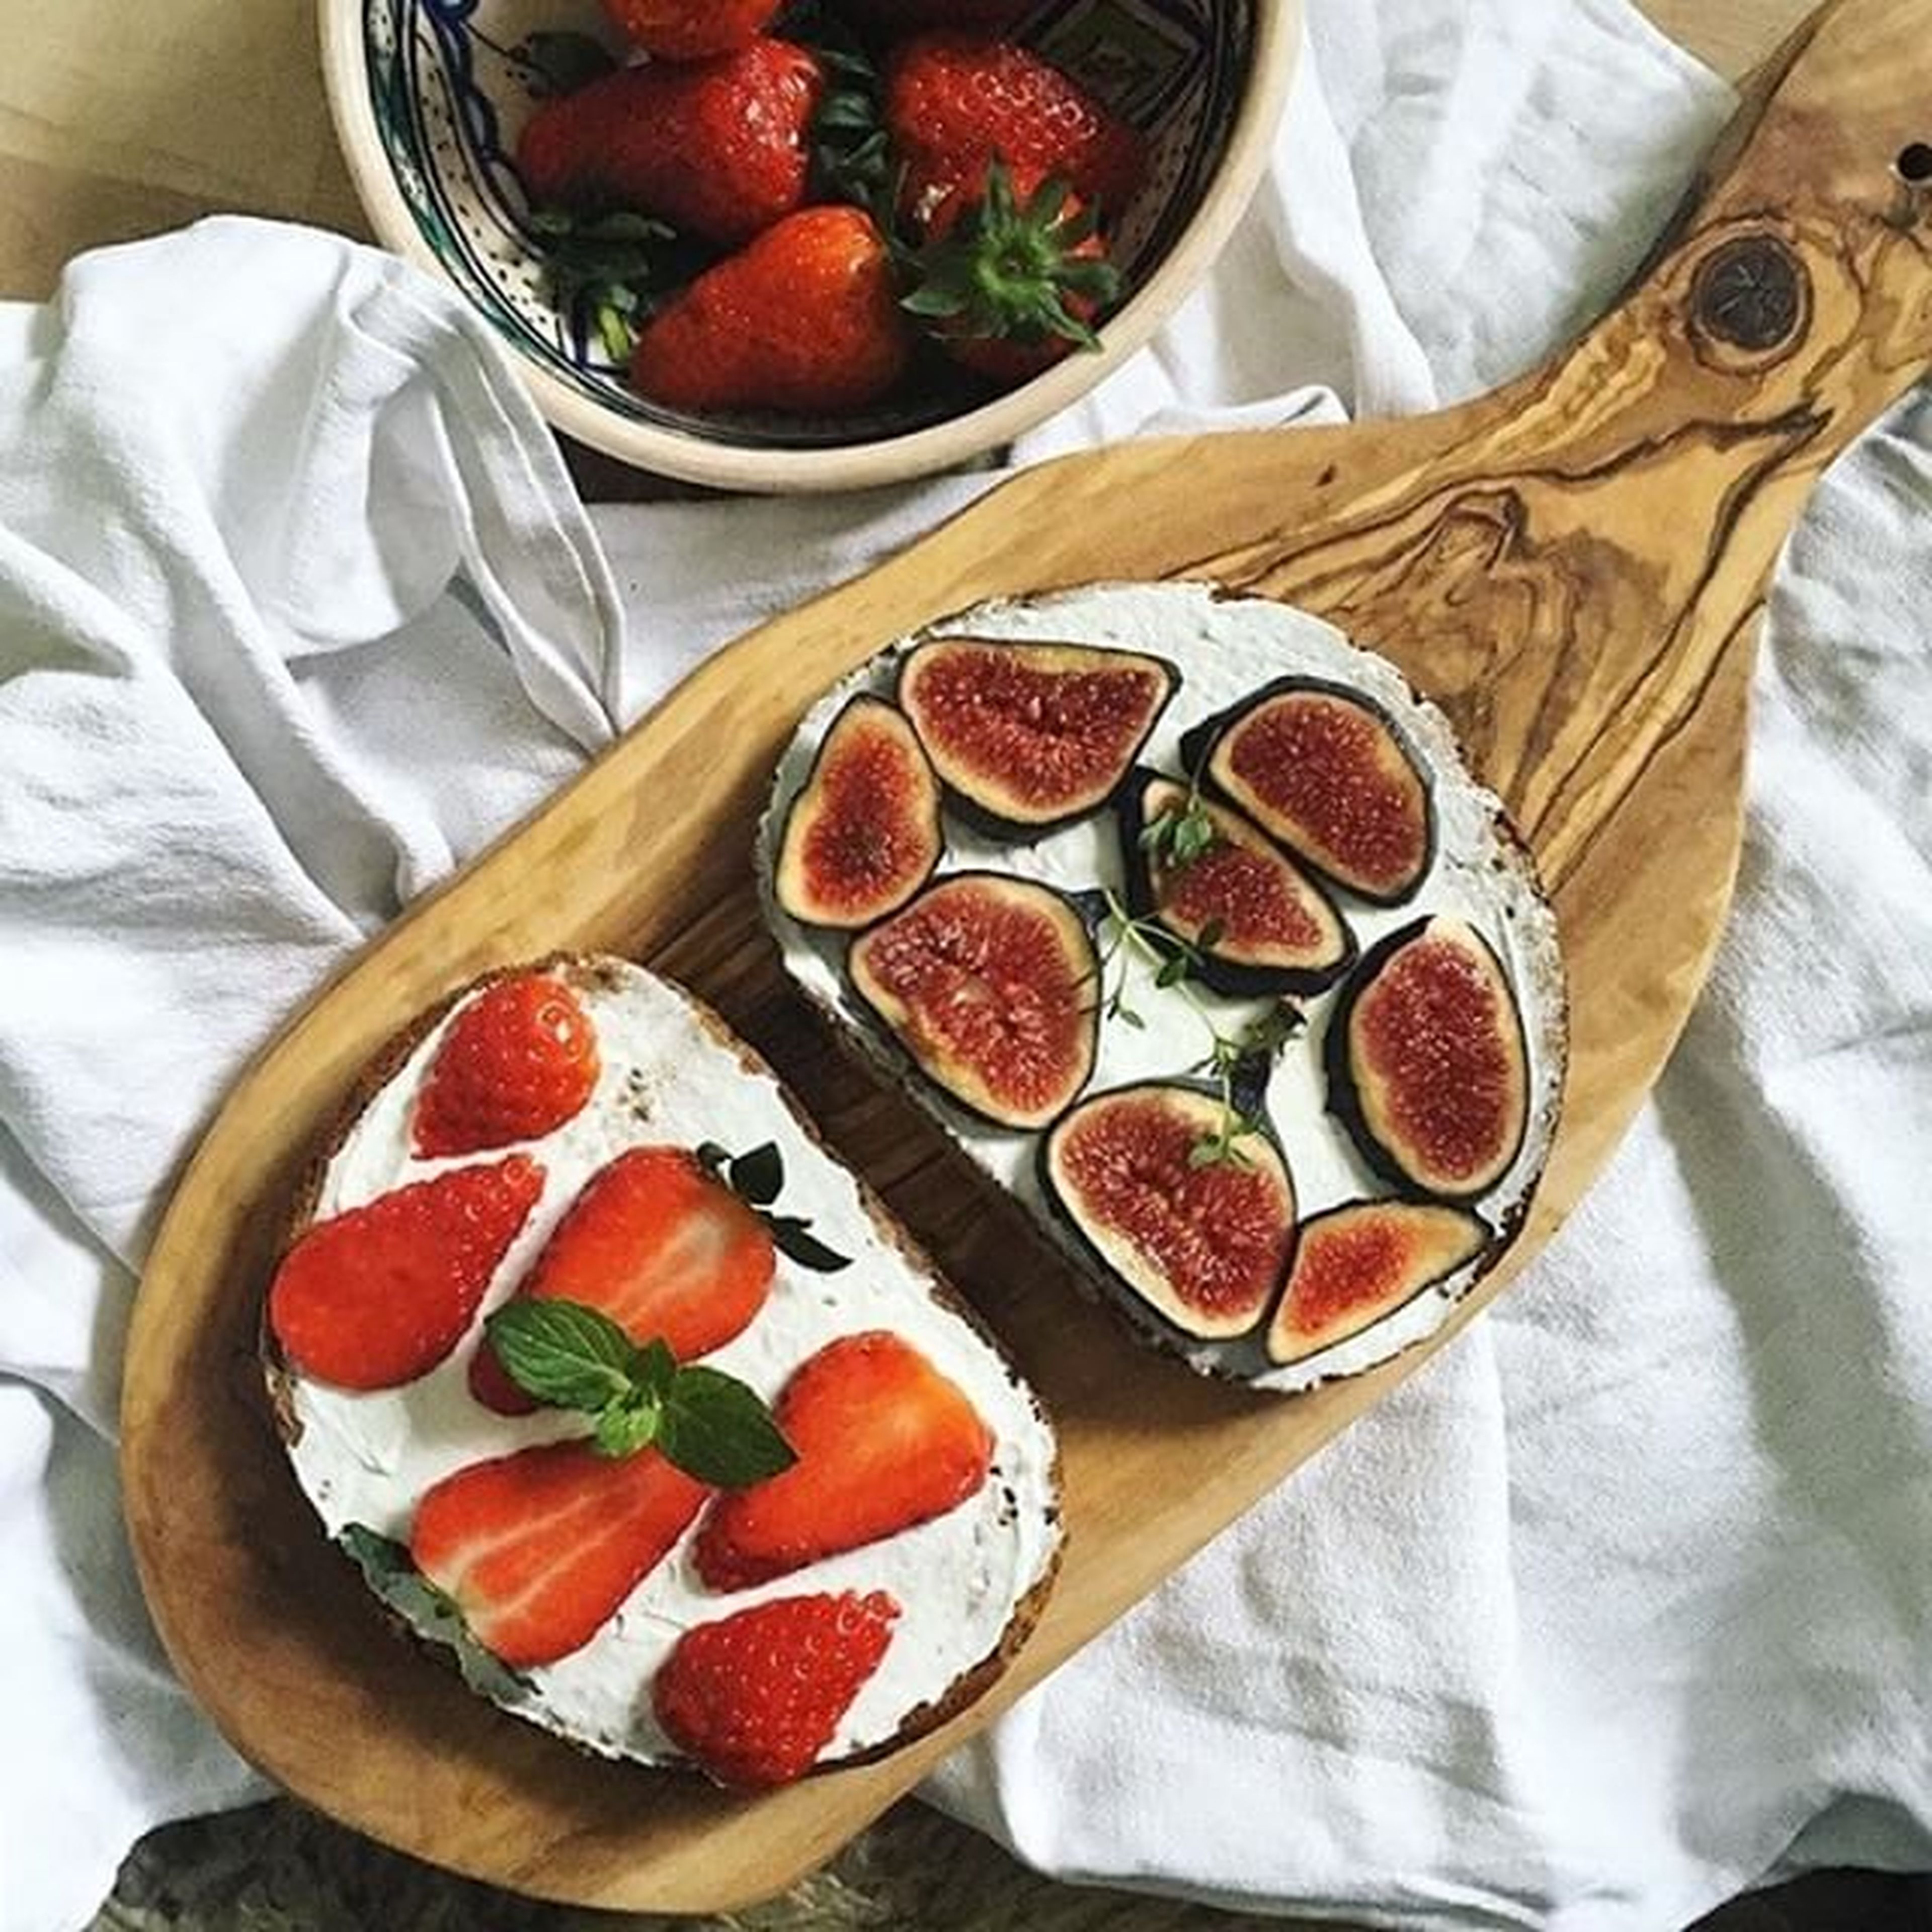 Bread with figs and strawberries